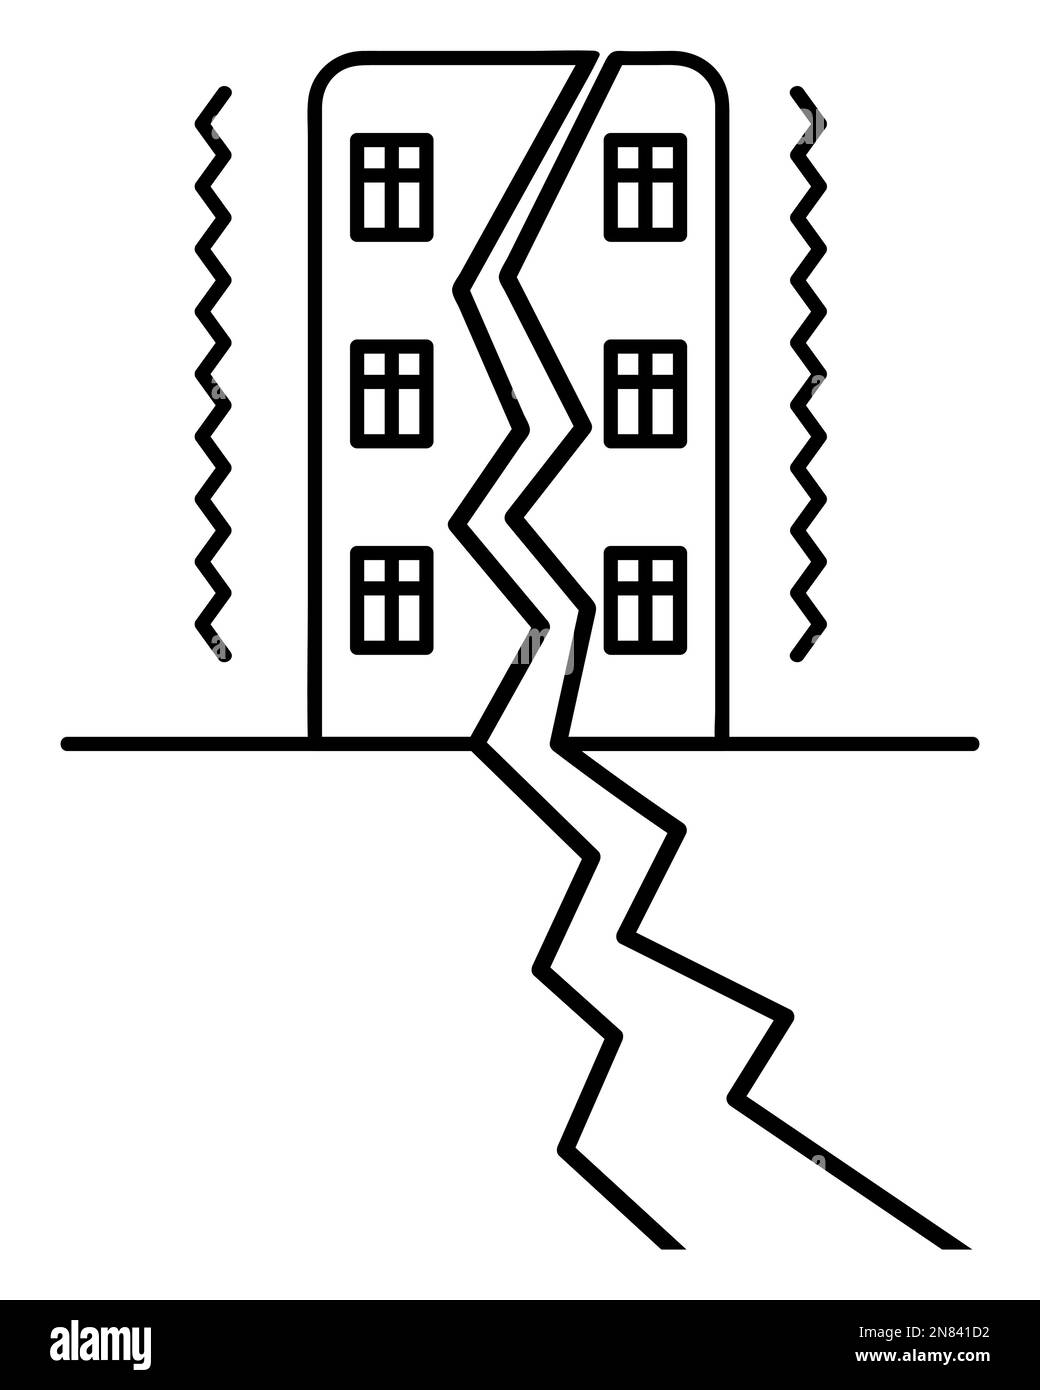 Earthquake. There was a crack in the wall of the house. The apartment building is split in half. Stock Vector